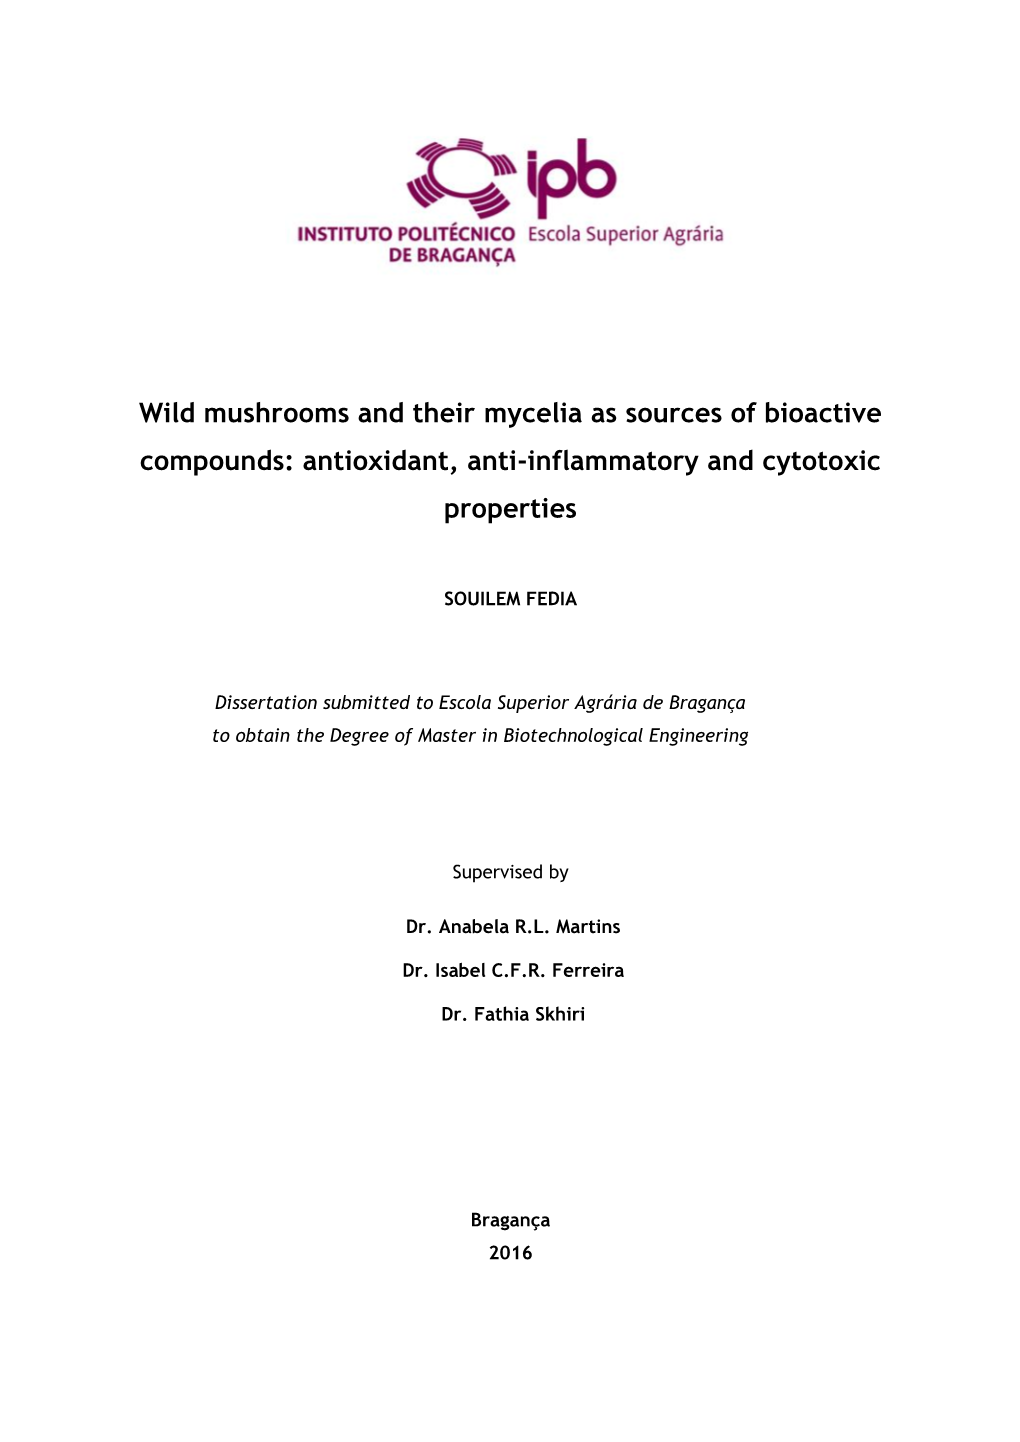 Wild Mushrooms and Their Mycelia As Sources of Bioactive Compounds: Antioxidant, Anti-Inflammatory and Cytotoxic Properties